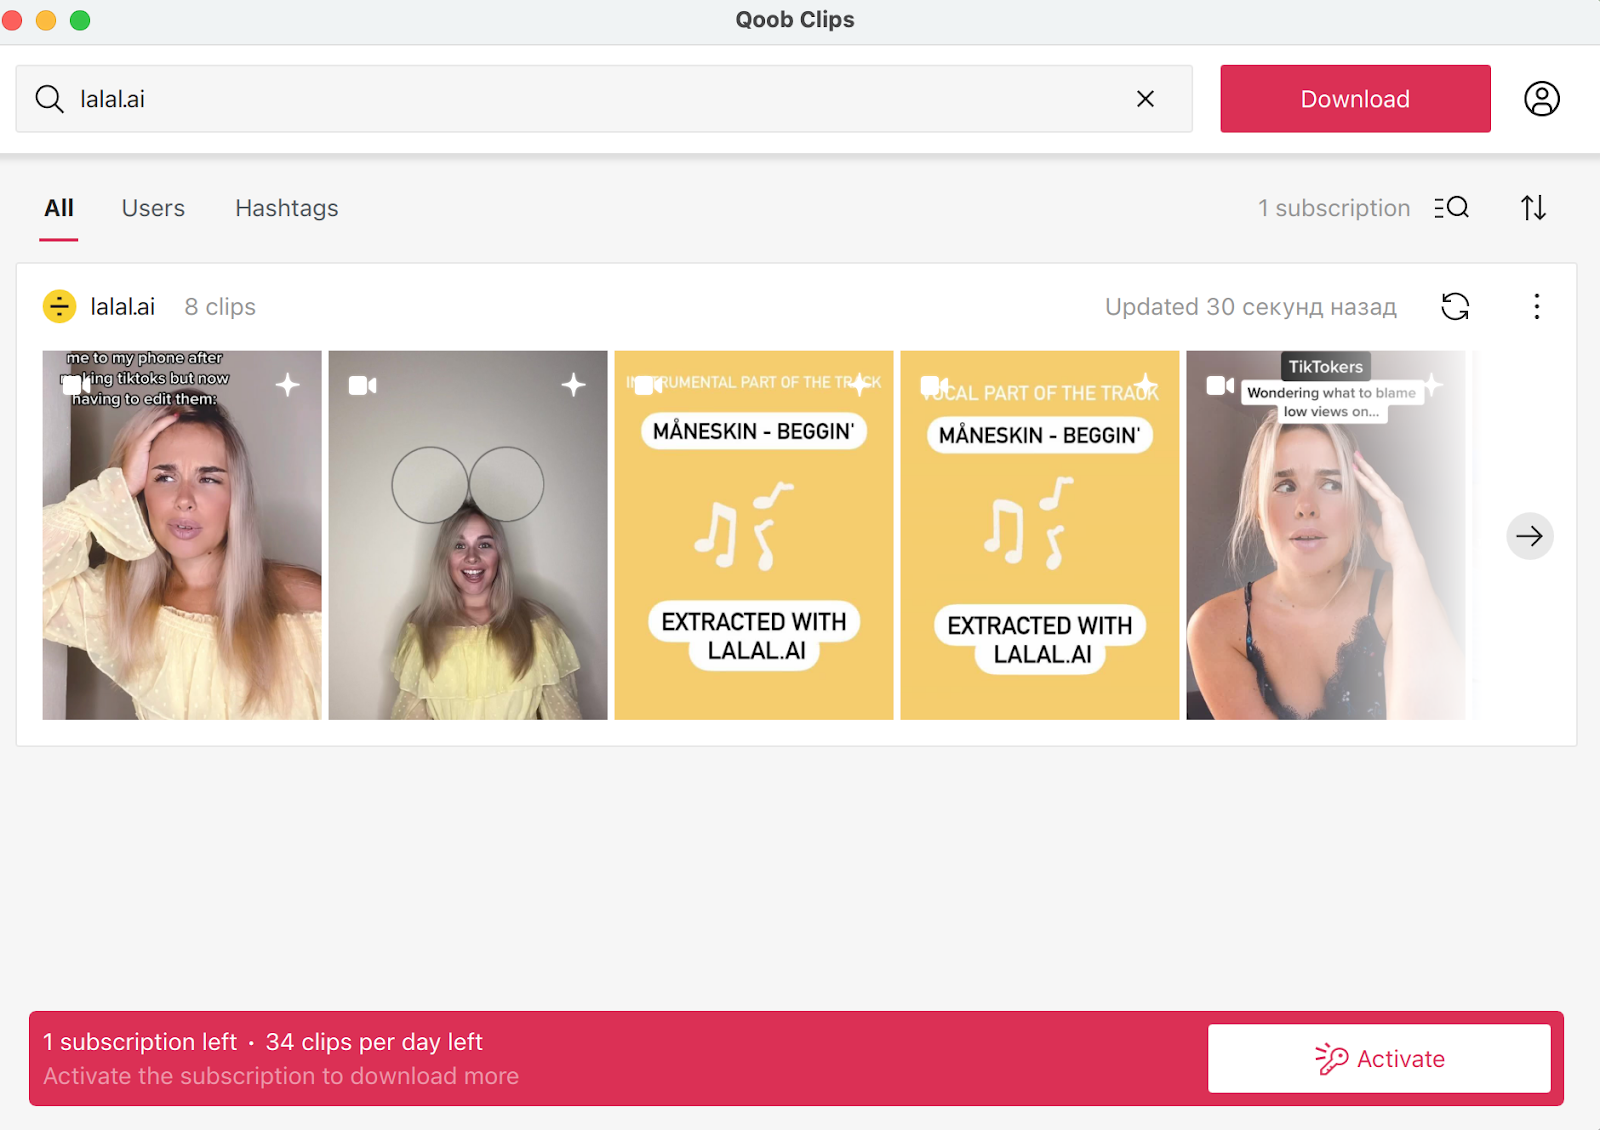 How to Easily Download TikTok Videos With Qoob Clips